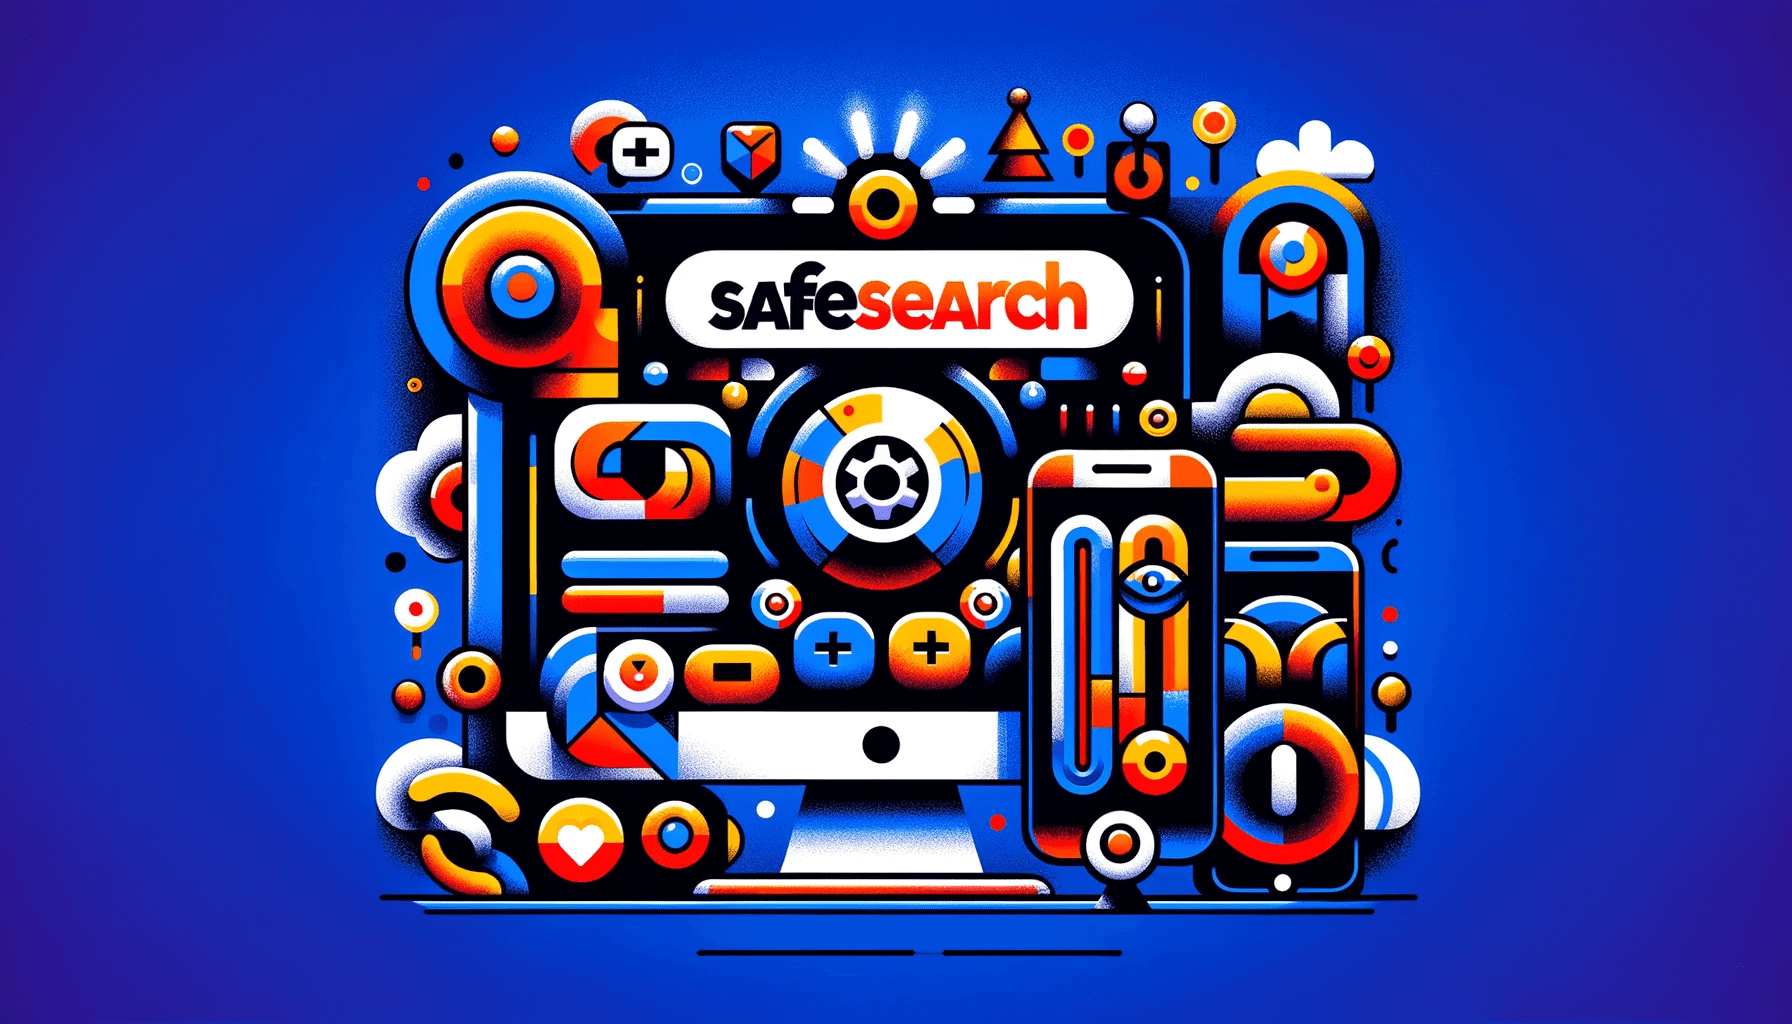 SafeSearch Control: How to Turn SafeSearch On/Off on Desktop and Mobile